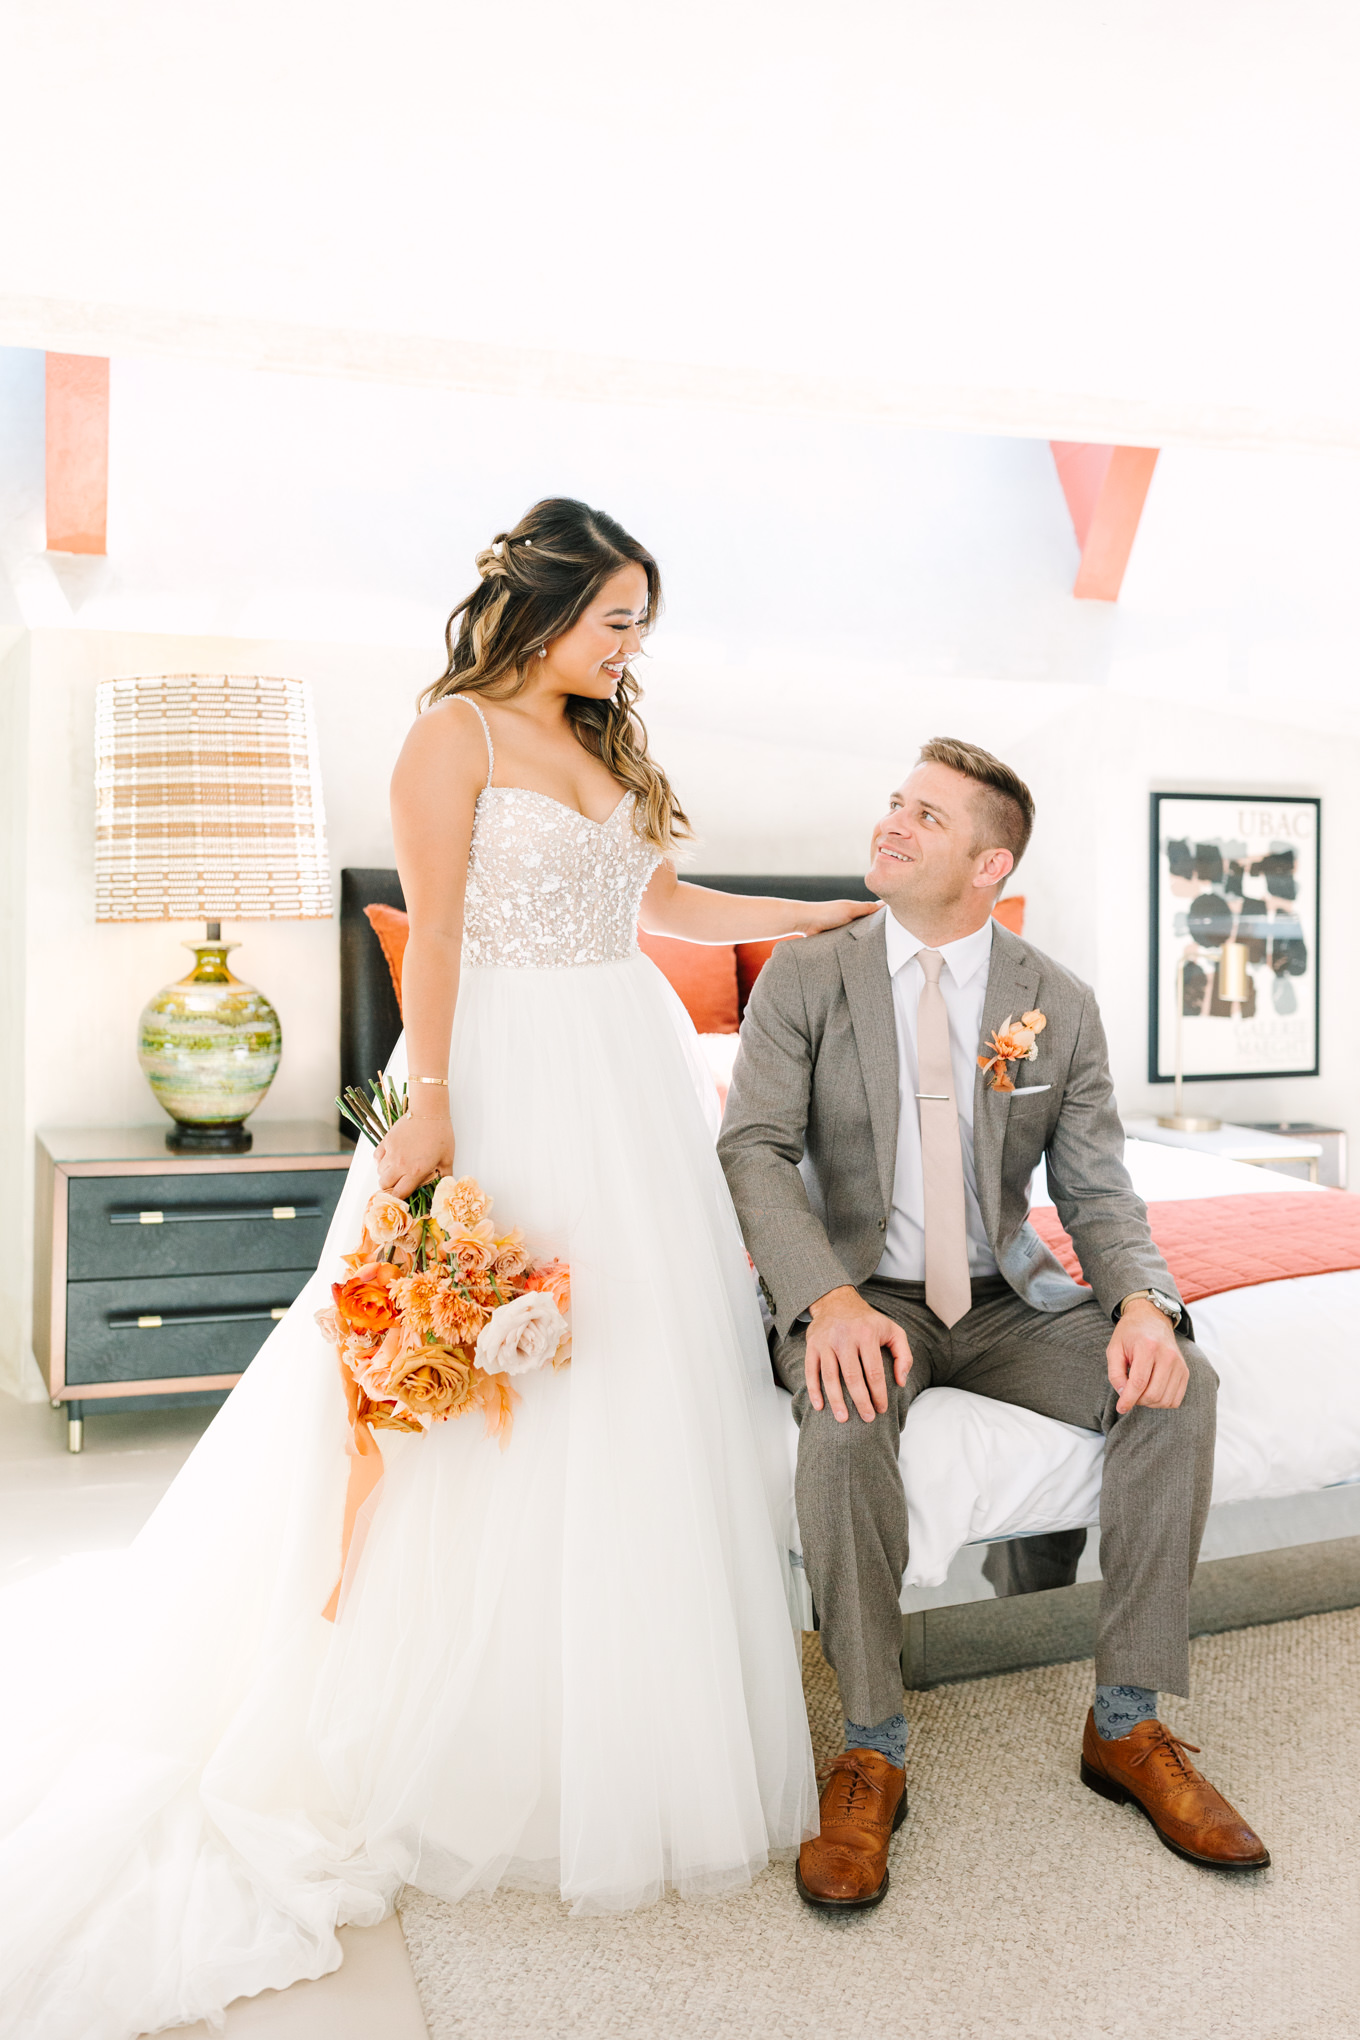 Bride and groom in mid century modern room | Pink and orange Lautner Compound wedding | Colorful Palm Springs wedding photography | #palmspringsphotographer #palmspringswedding #lautnercompound #southerncaliforniawedding  Source: Mary Costa Photography | Los Angeles